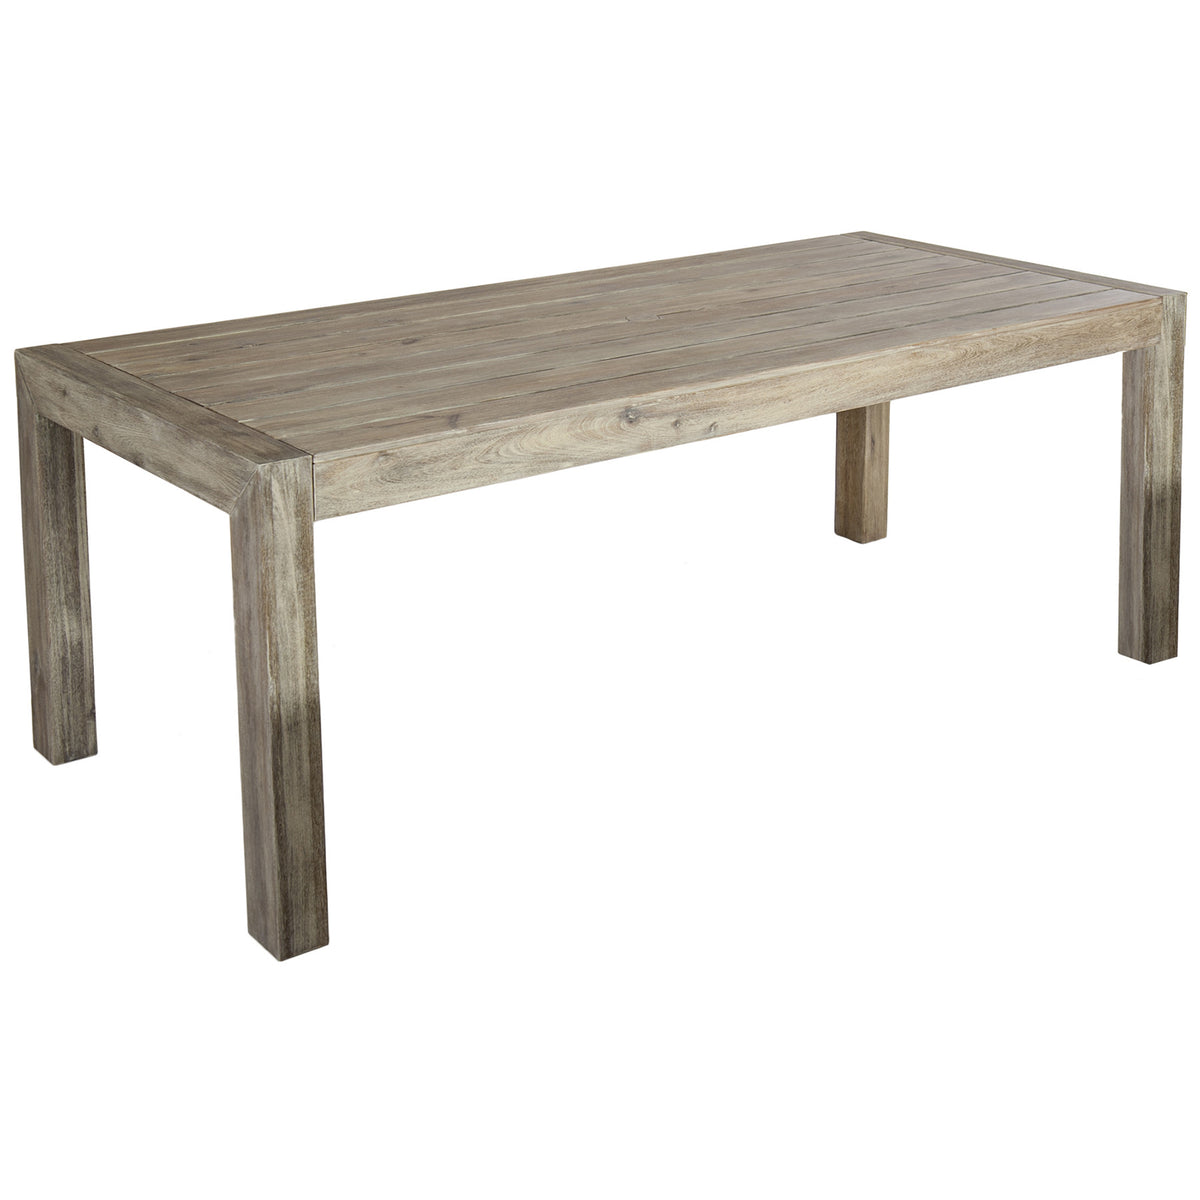 Alexander Rose Old England Painted Acacia Table (2m x 0.90m)